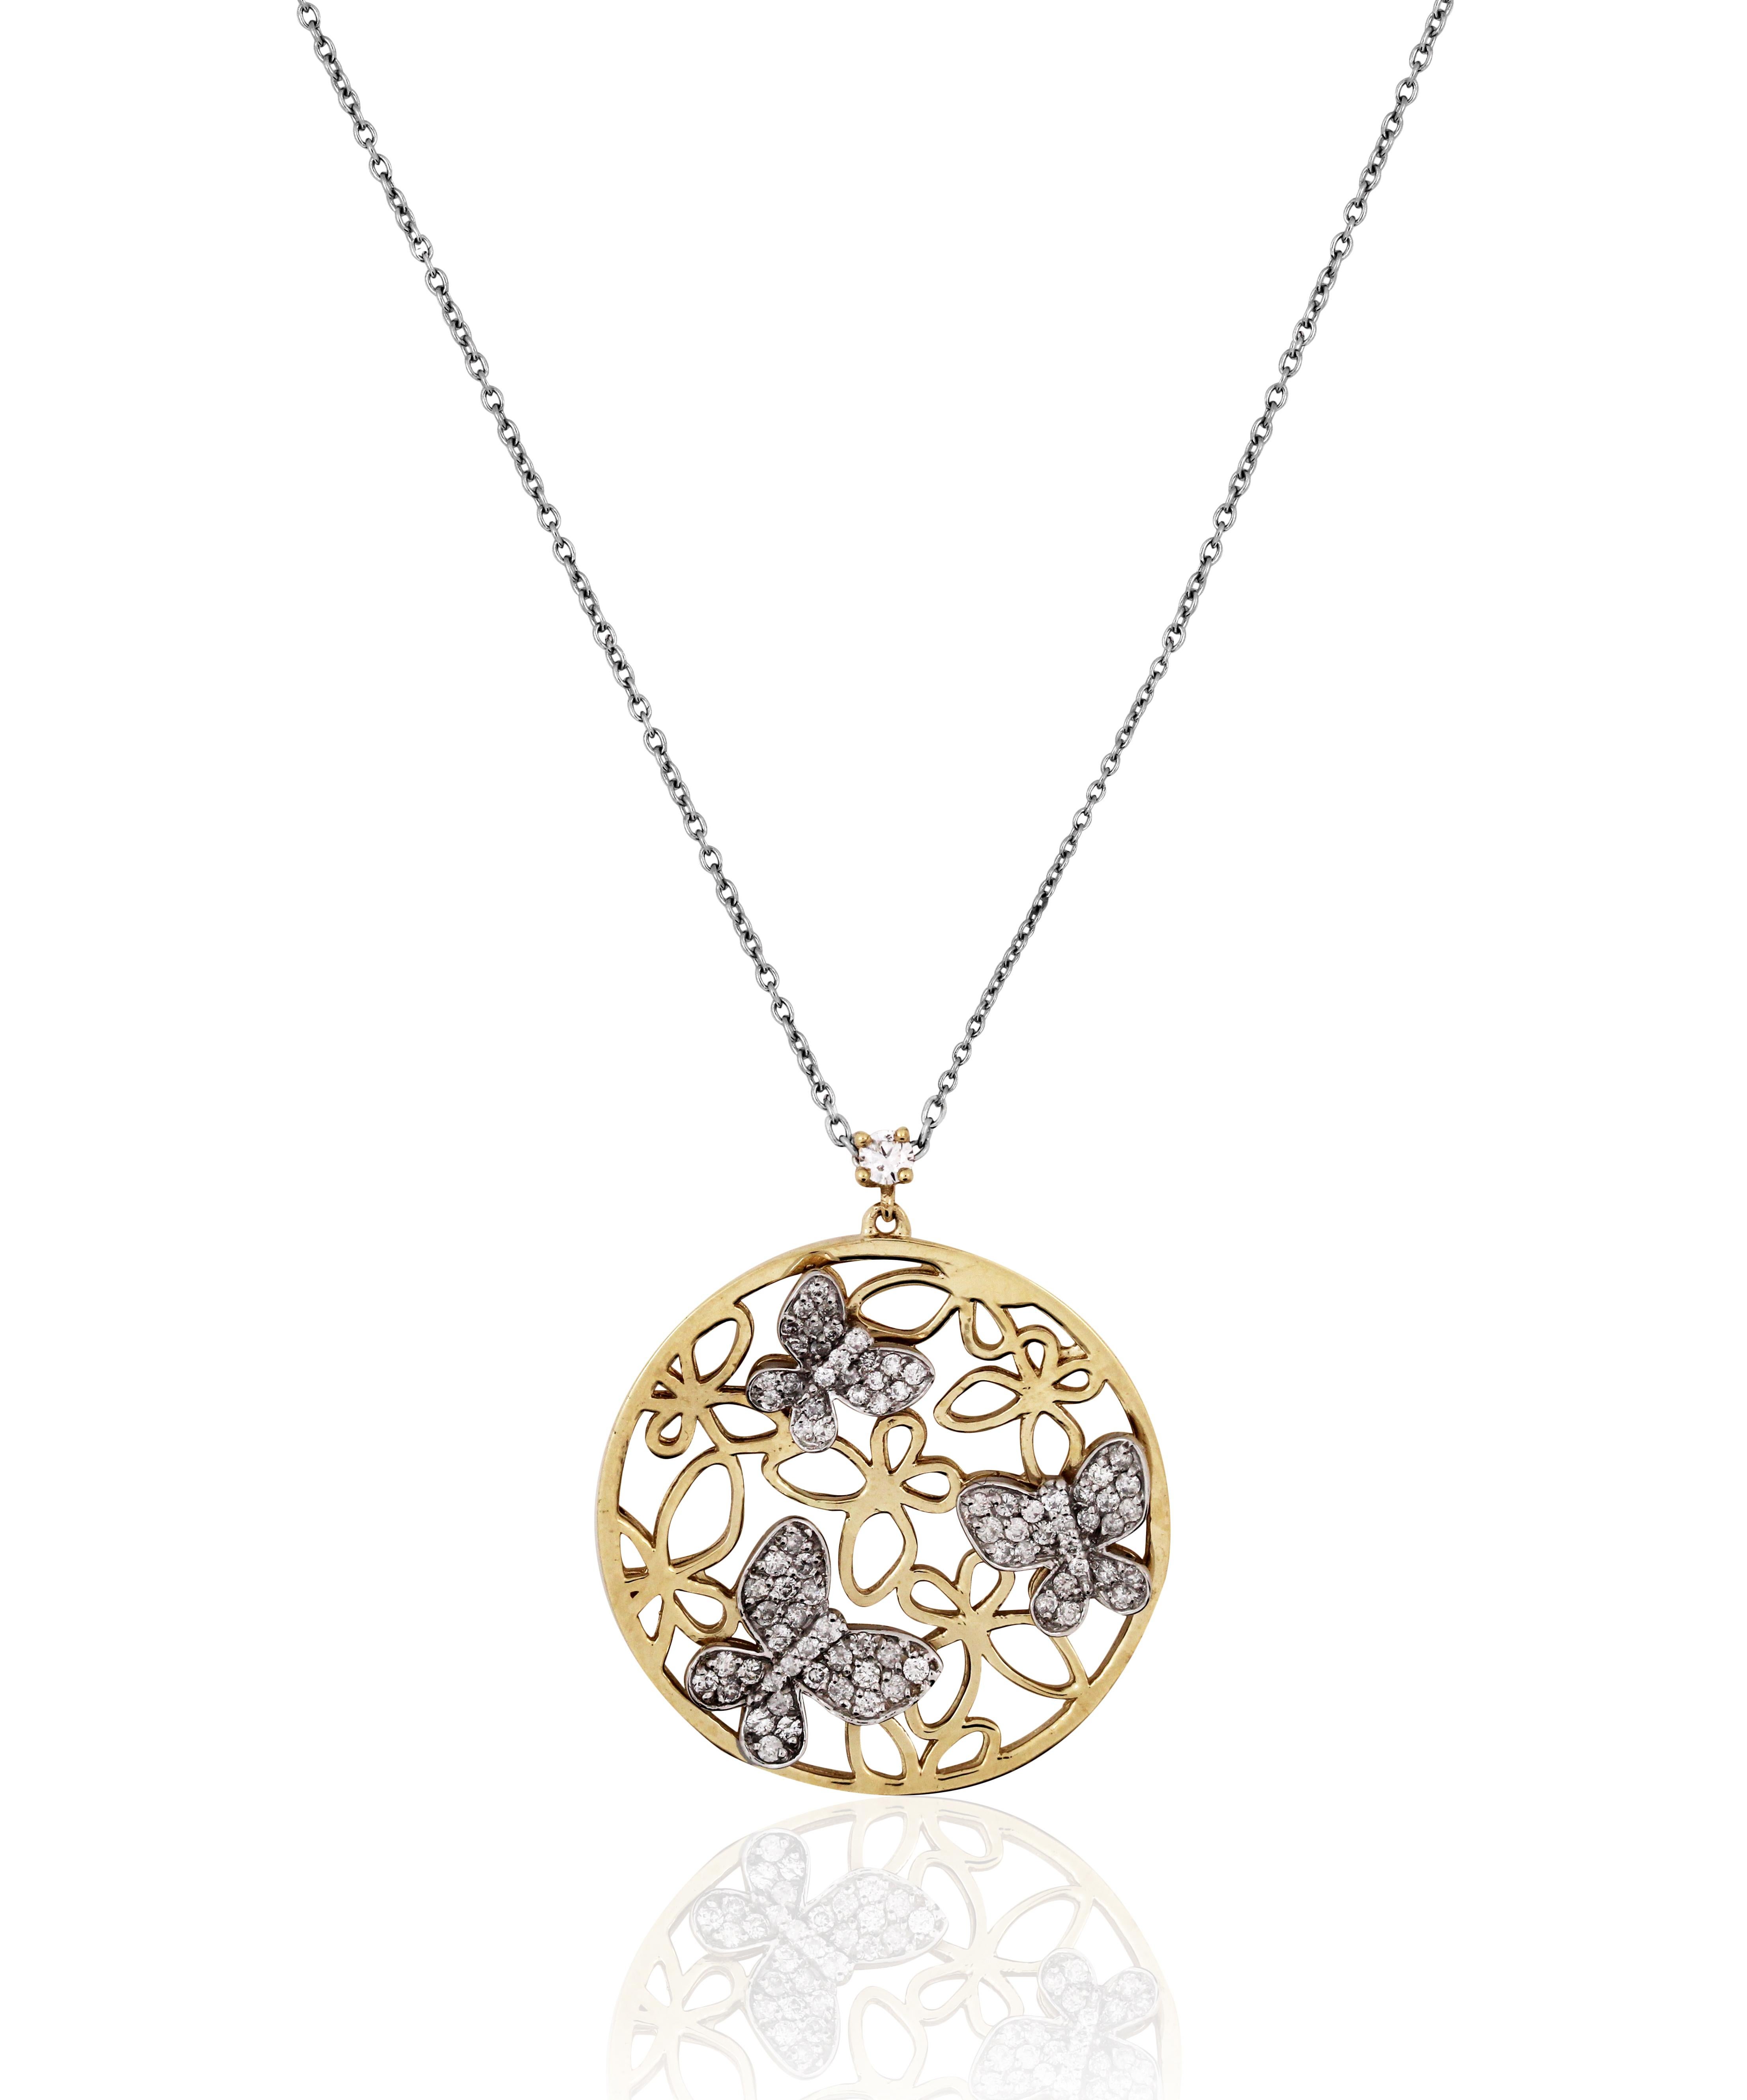 14K Two-Tone Yellow White Gold and Diamond Butterfly Disk Pendant Necklace

0.49 carat H color, SI clarity diamonds

7.90 grams 14K gold

Pendant is 1.2 inch length x 1 inch width

Chain is 17 inches in length with option to wear at 16 inches